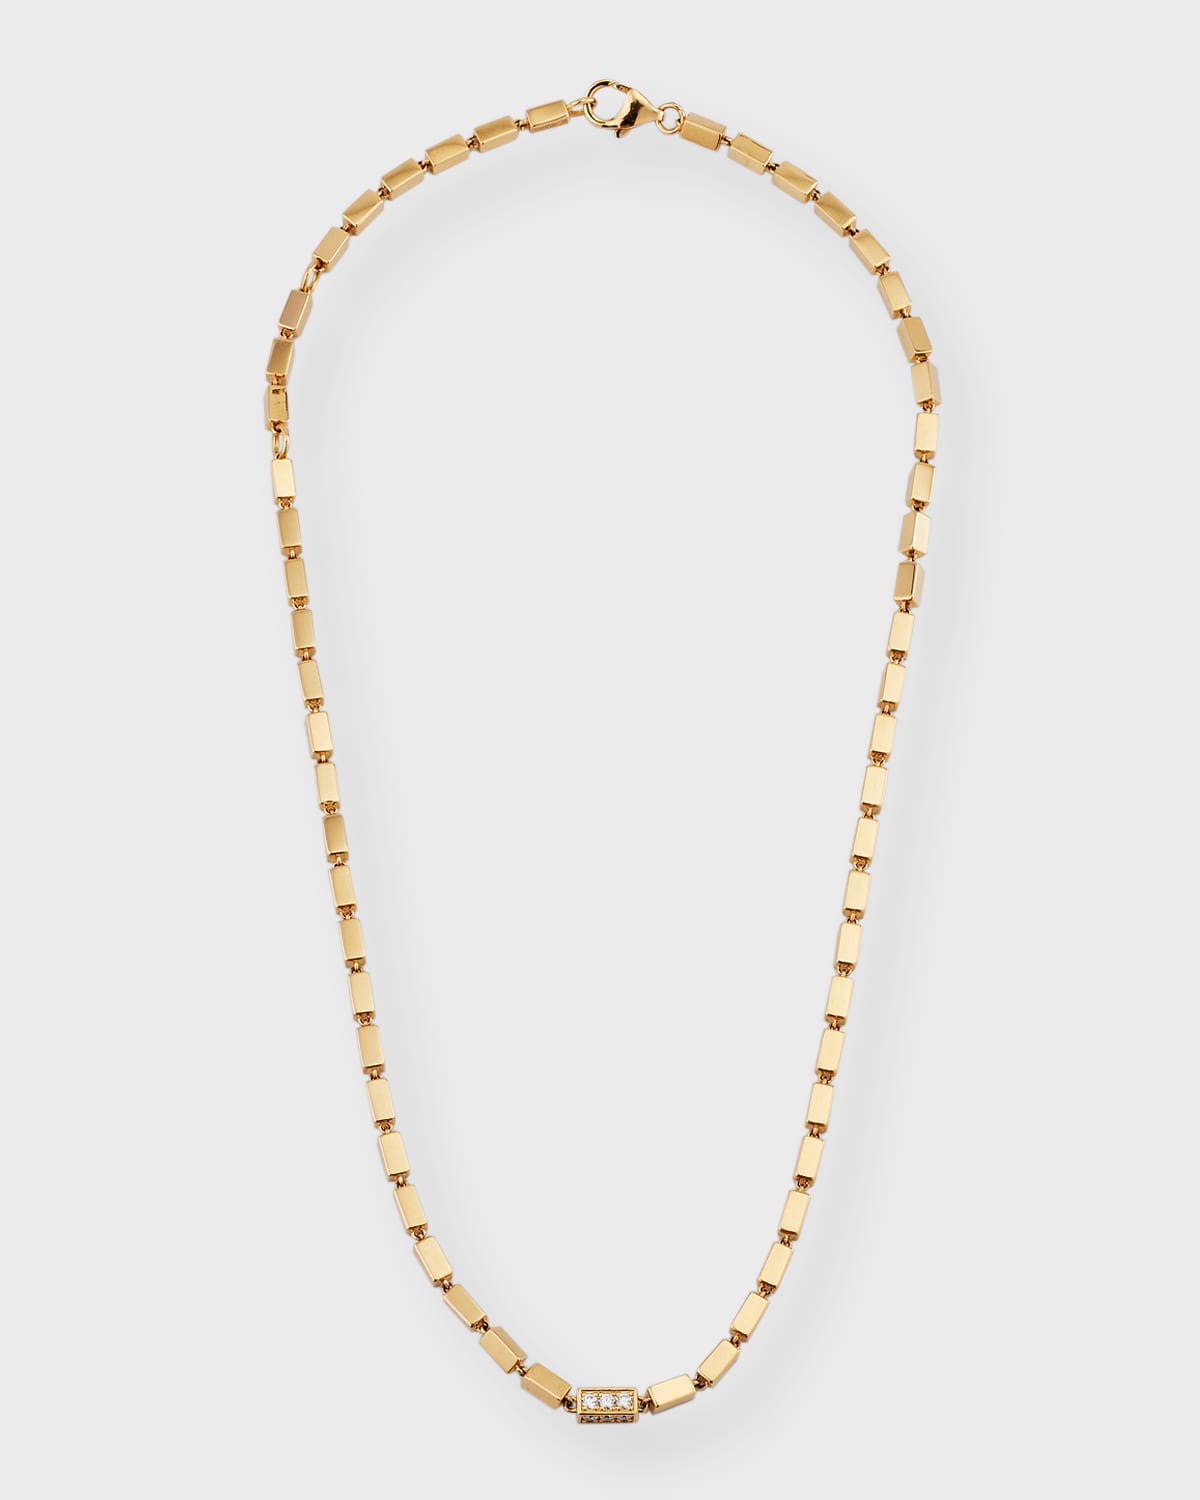 Suzanne Kalan 18k Yellow Gold Baguette Necklace With Single Pave Link